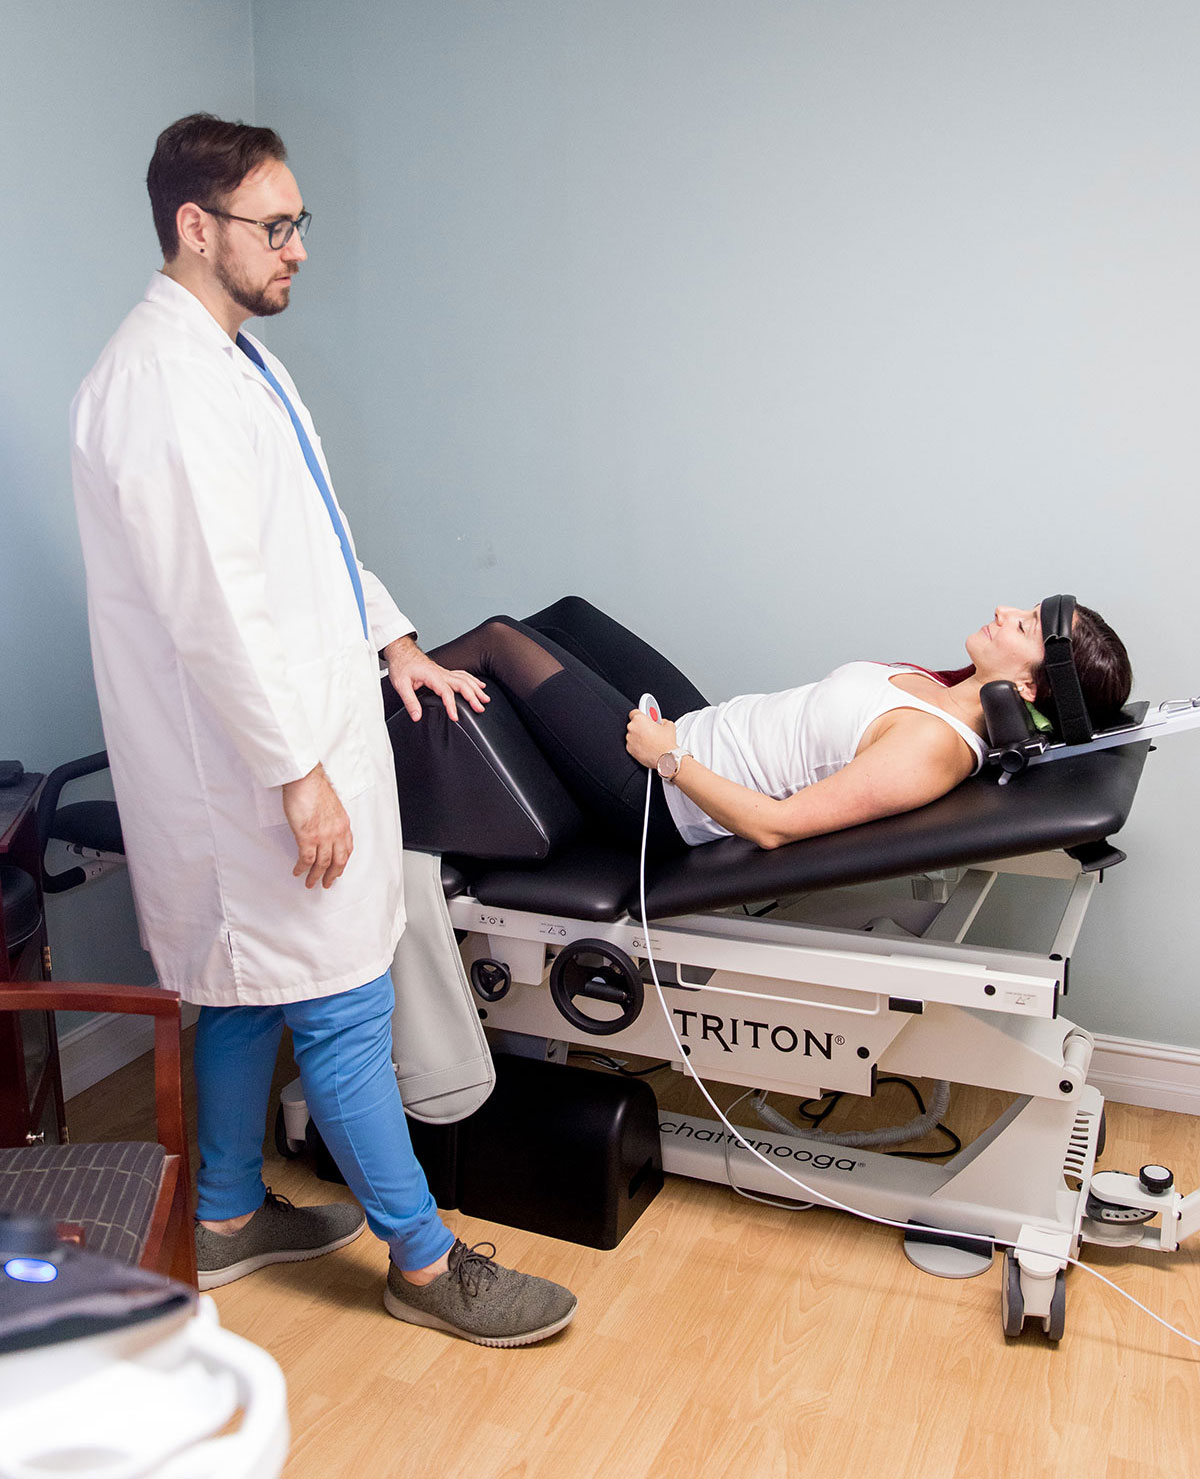 Dr. Matthew Sipe speaking with a patient using the spinal decompression machine